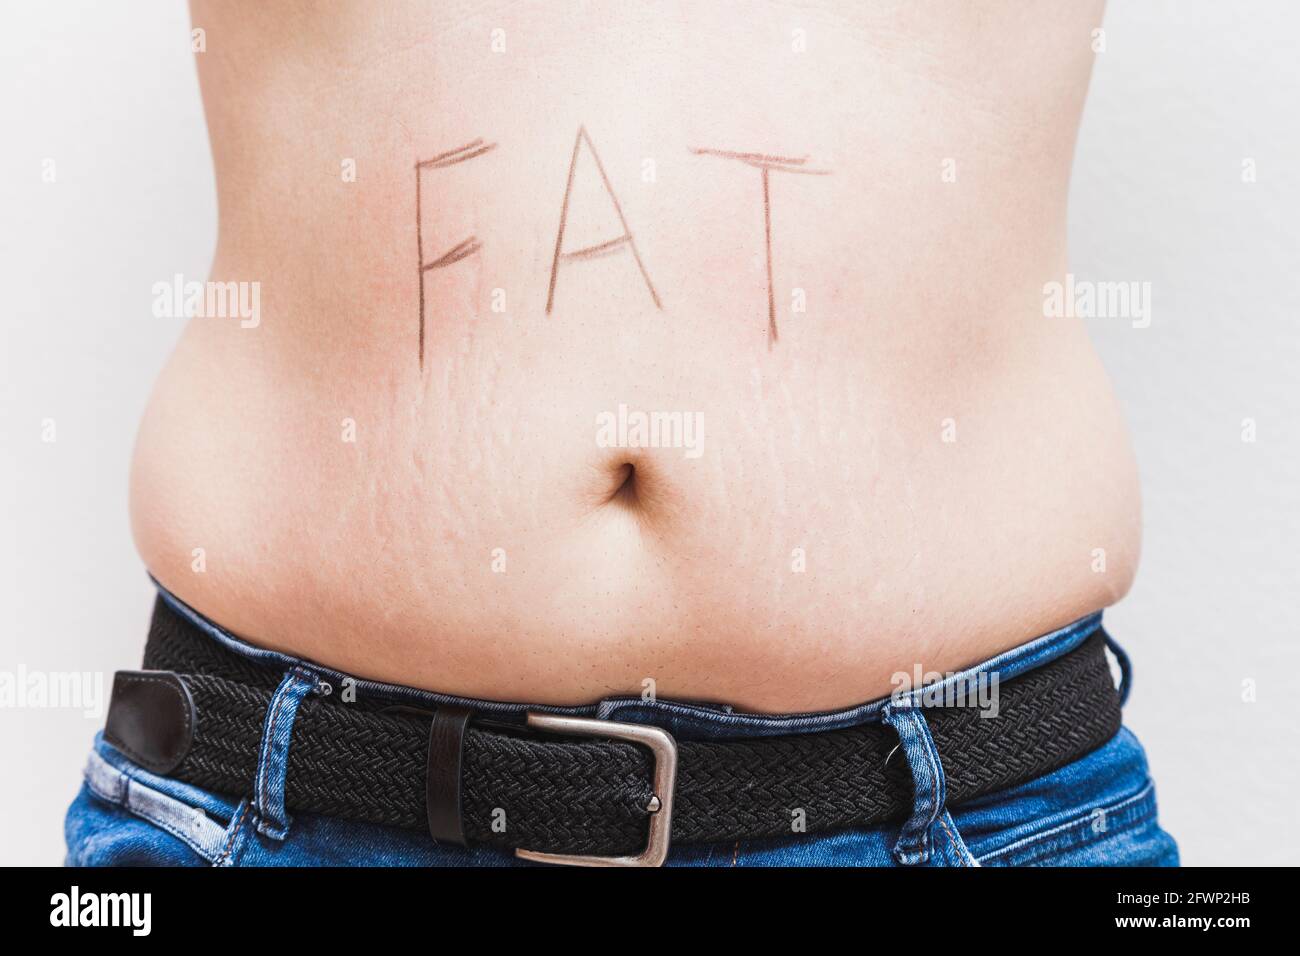 The word 'fat' written on the belly of an unrecognizable fat man. The man is dressed in jeans and wearing a black belt. Stock Photo